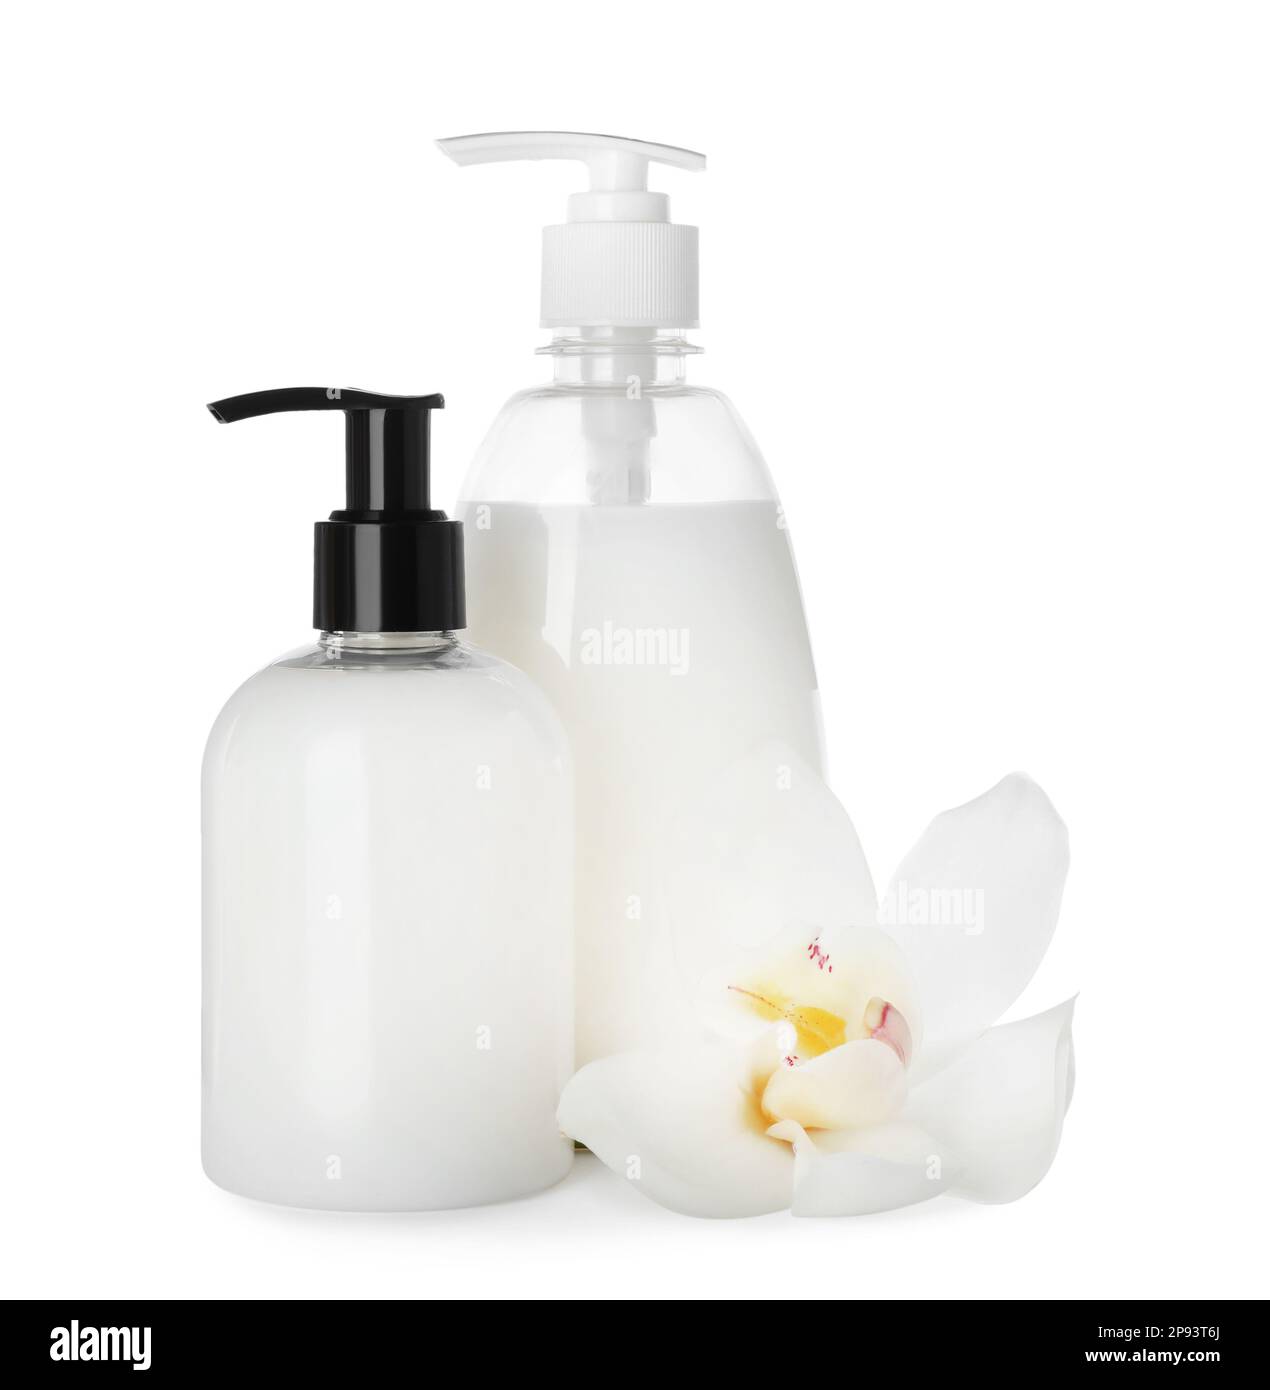 https://c8.alamy.com/comp/2P93T6J/dispensers-of-liquid-soap-and-orchid-flower-on-white-background-2P93T6J.jpg